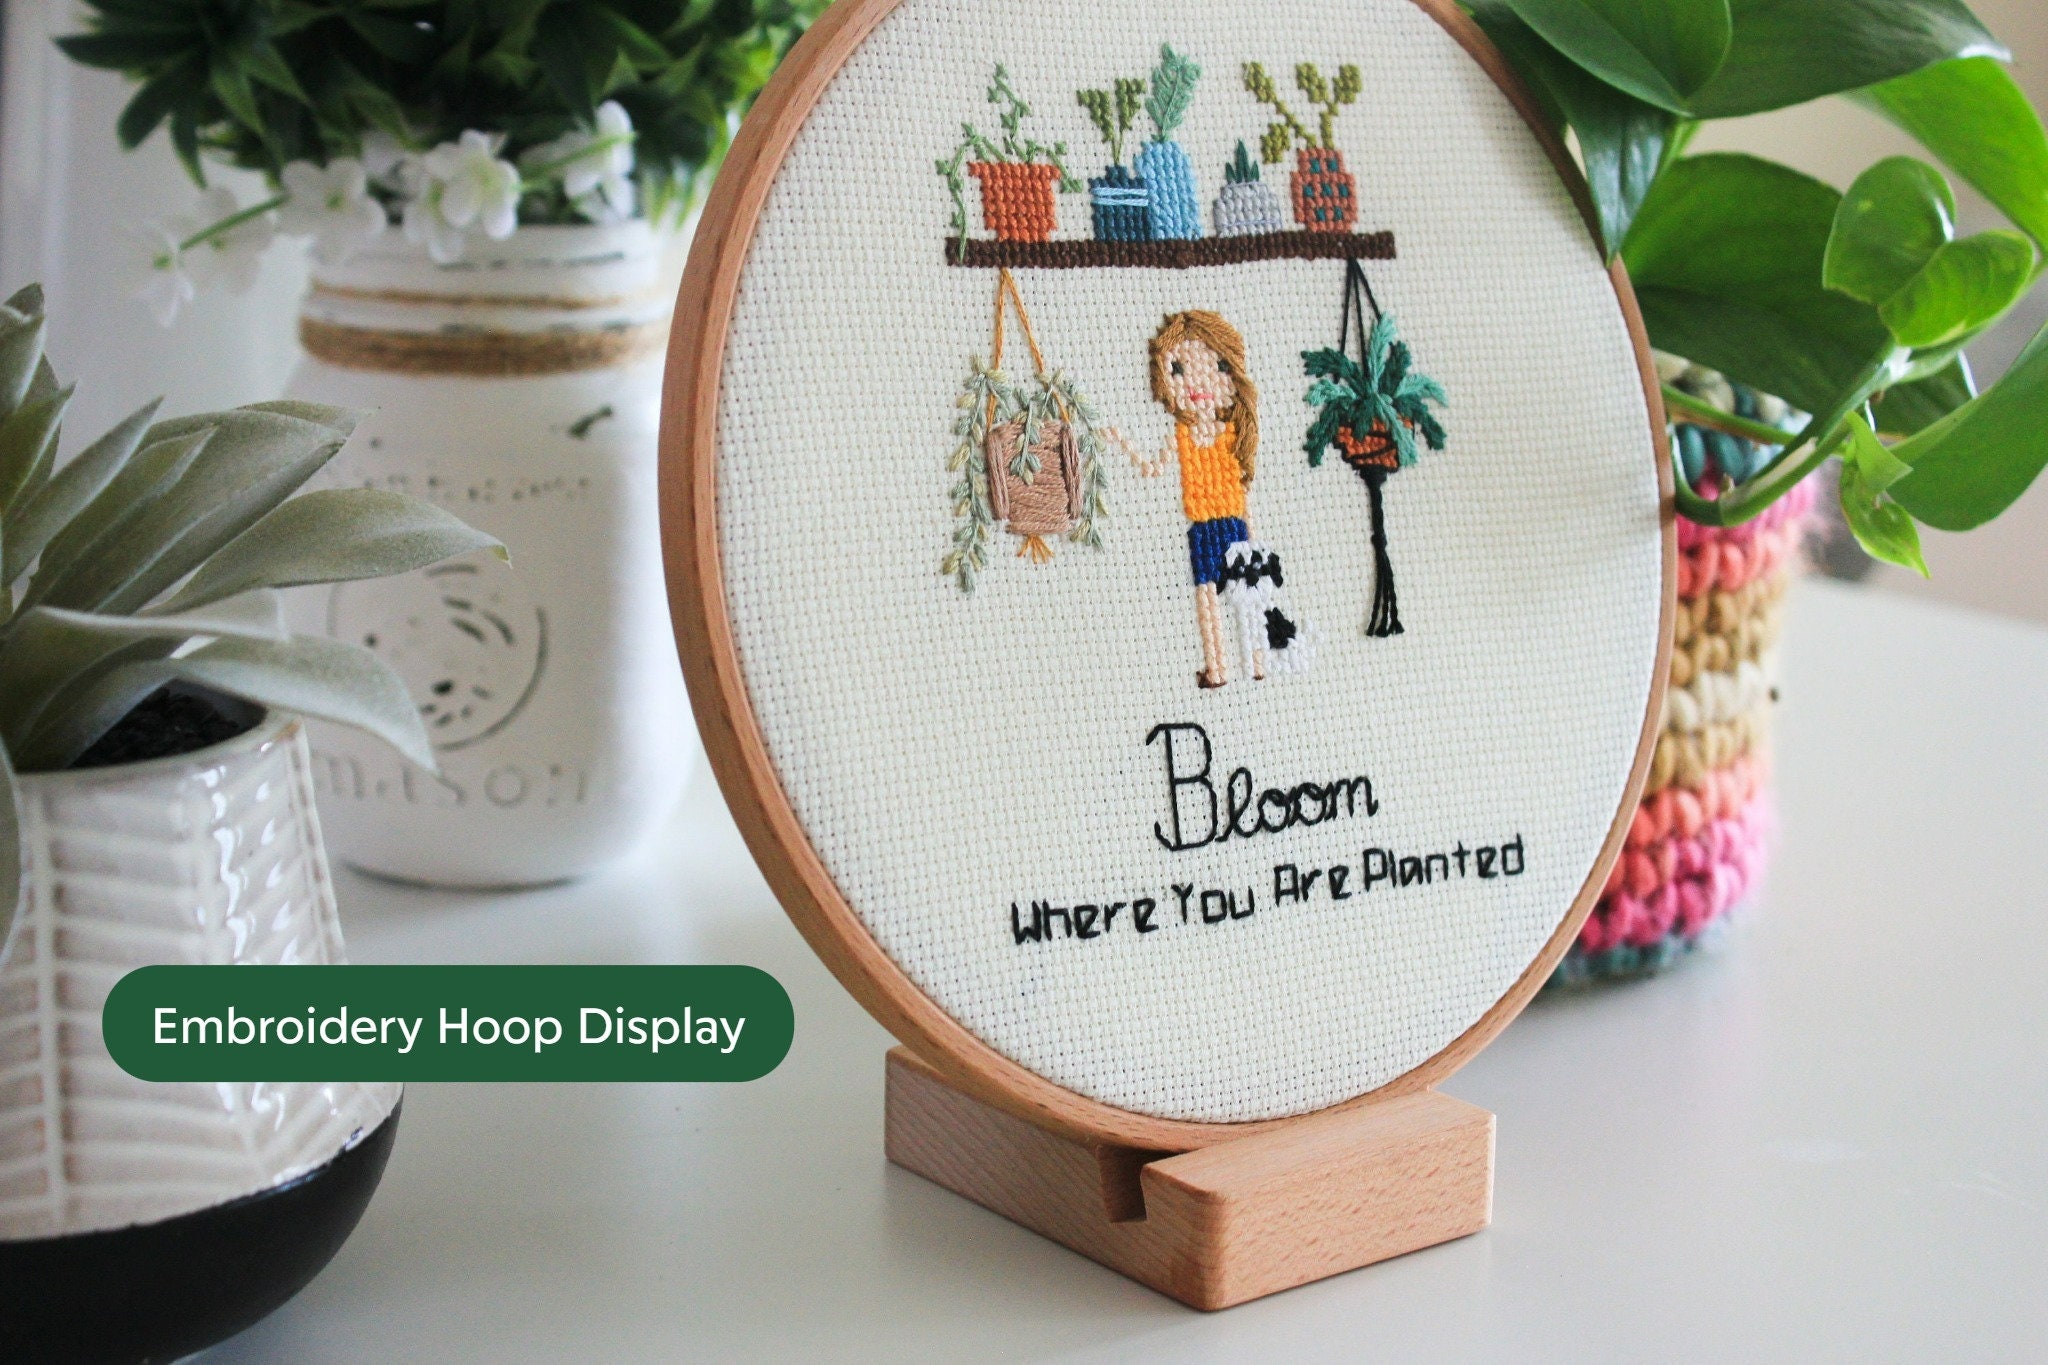 3 Easy and Attractive Ways to Display Embroidery Hoops